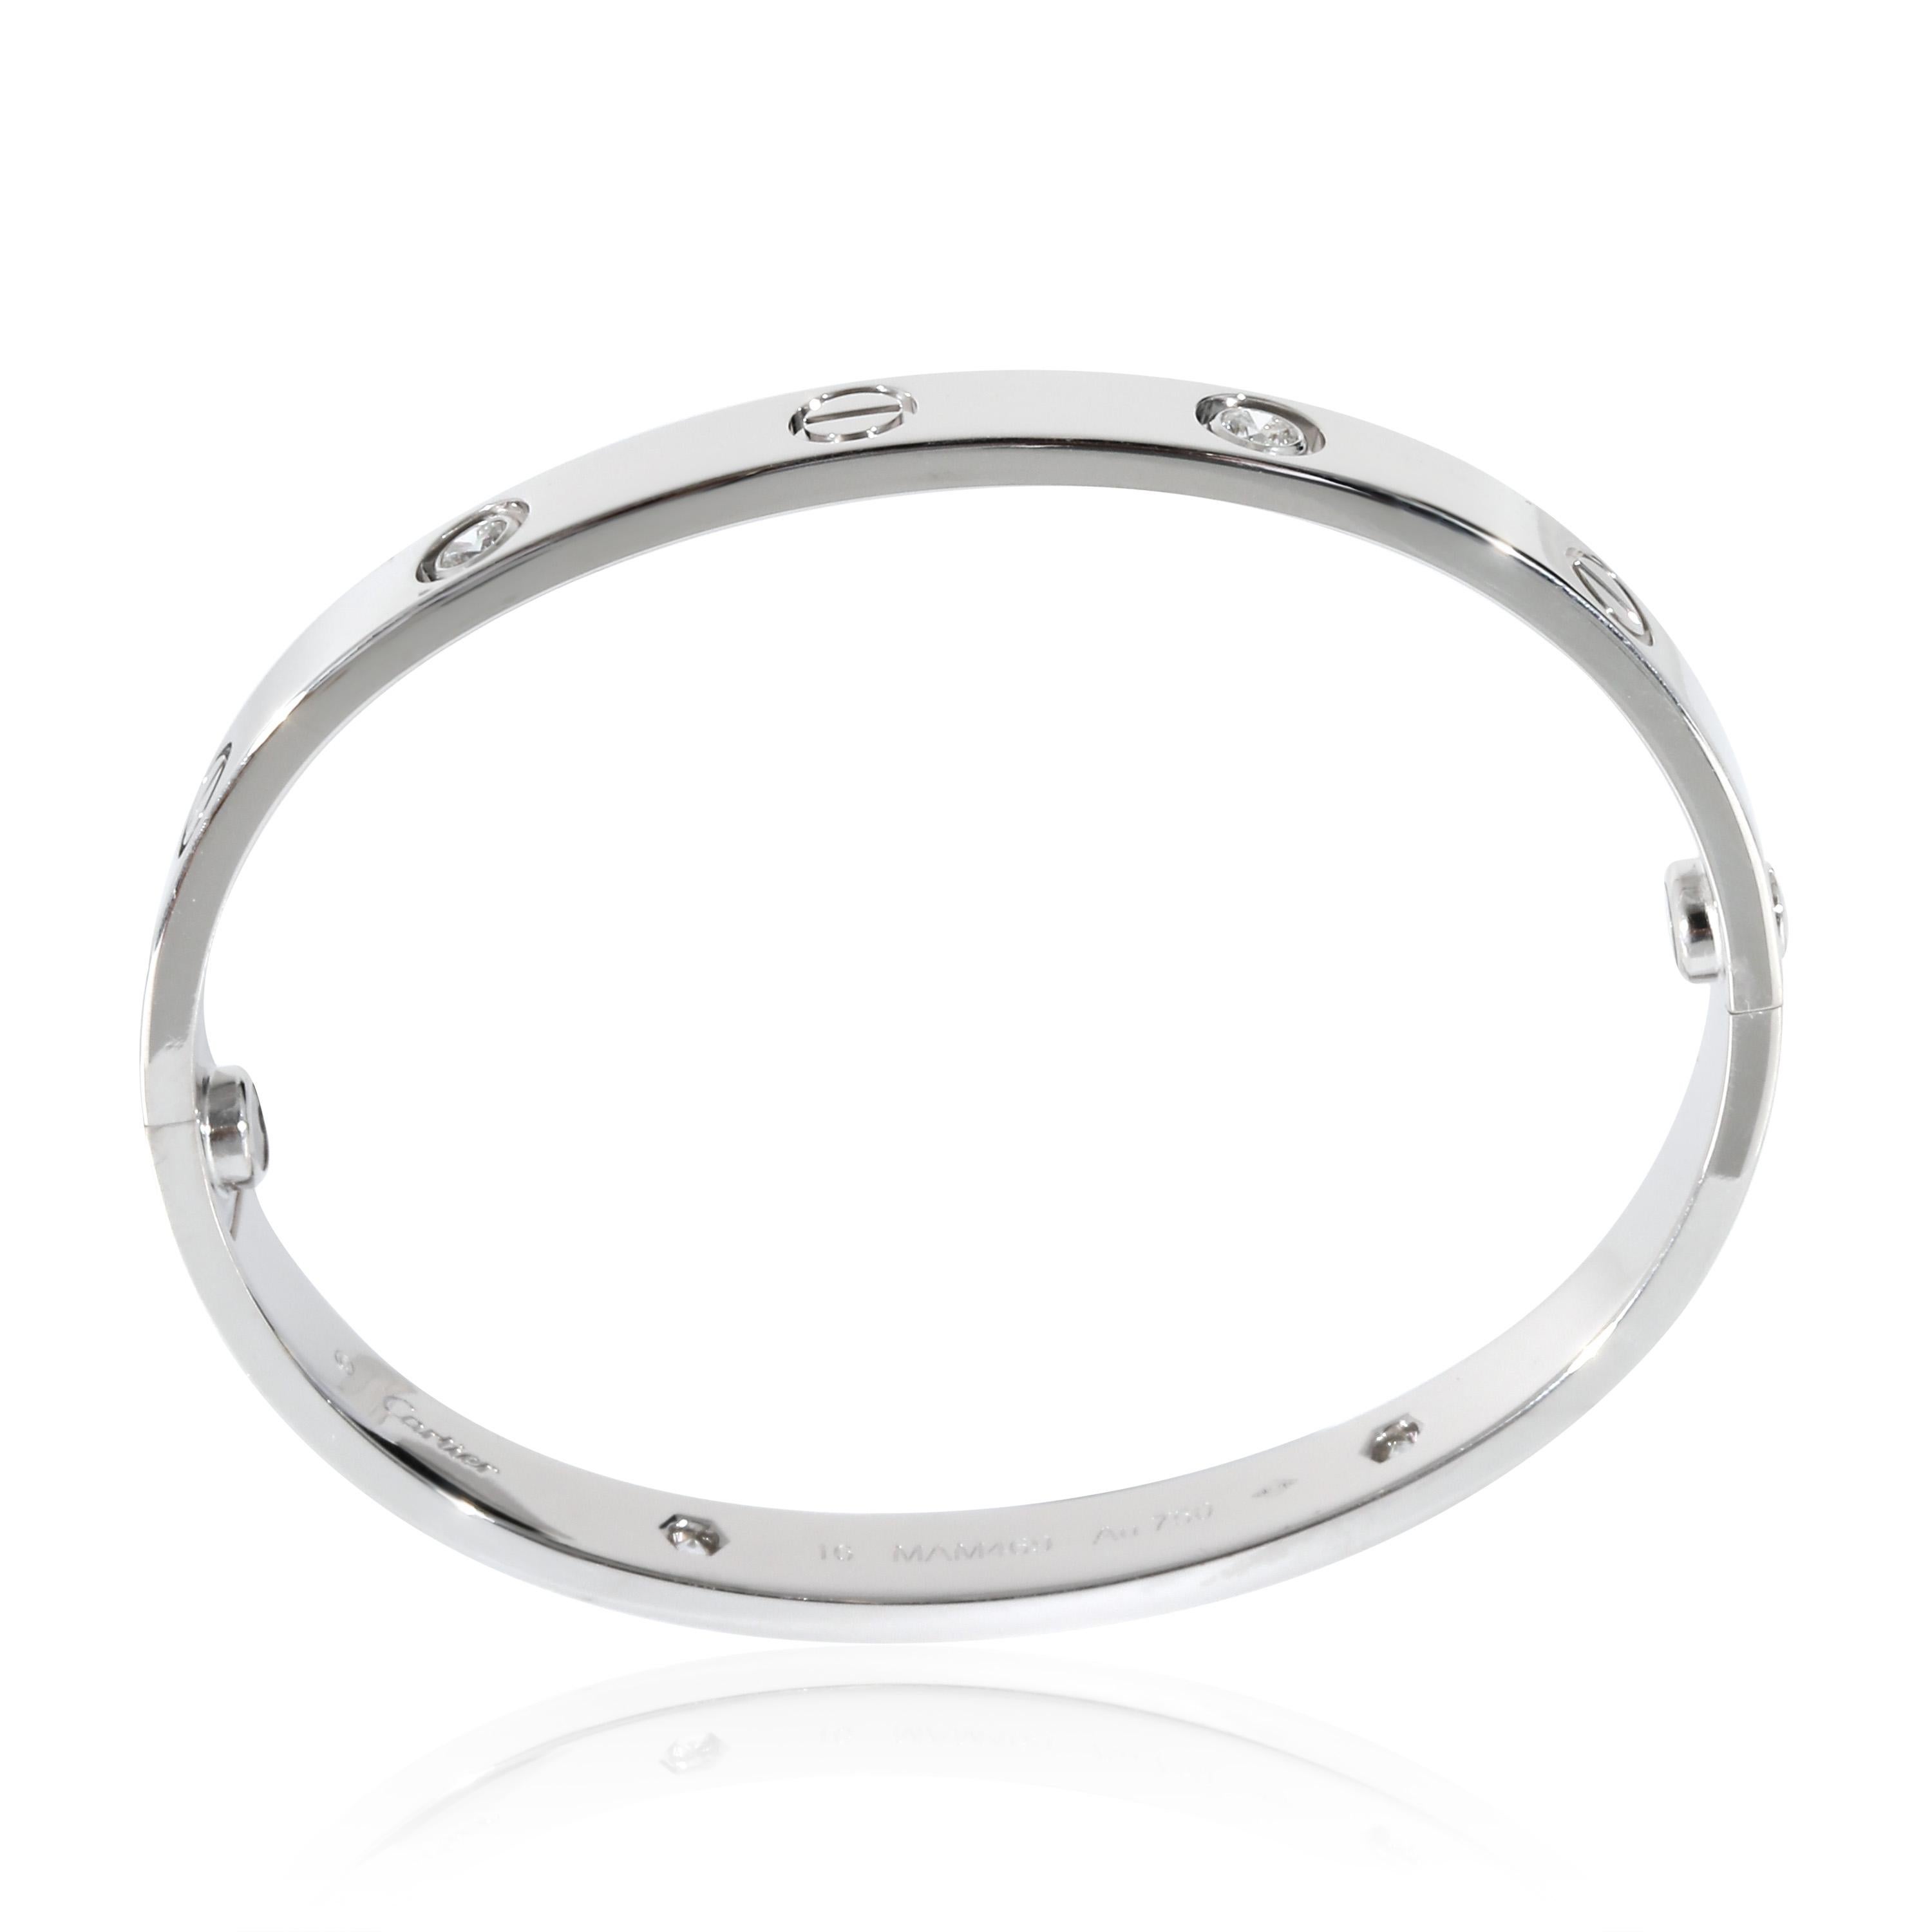 Cartier Love Bracelet in 18K White Gold 0.42 CTW In Excellent Condition For Sale In New York, NY